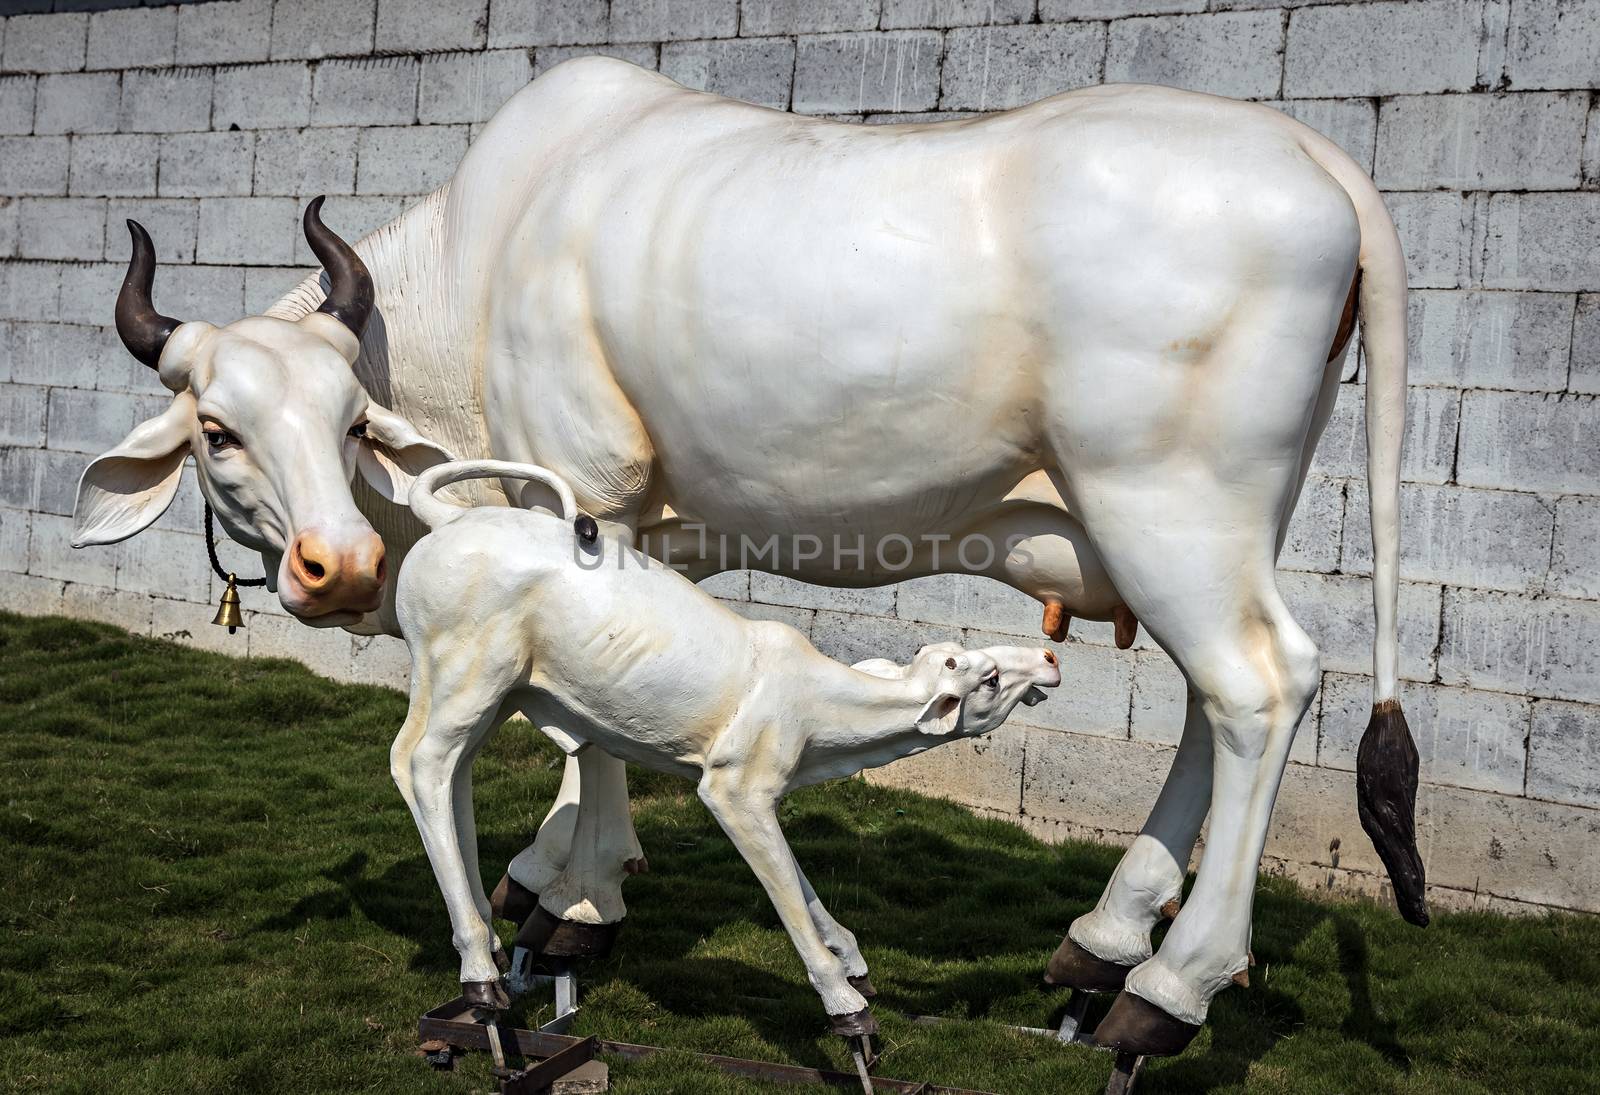 Beautifully crafted real-size sculpture of a cow milking her calf in Pune, Maharashtra, India. This life size statue is attractive and eye-catching for passers by.